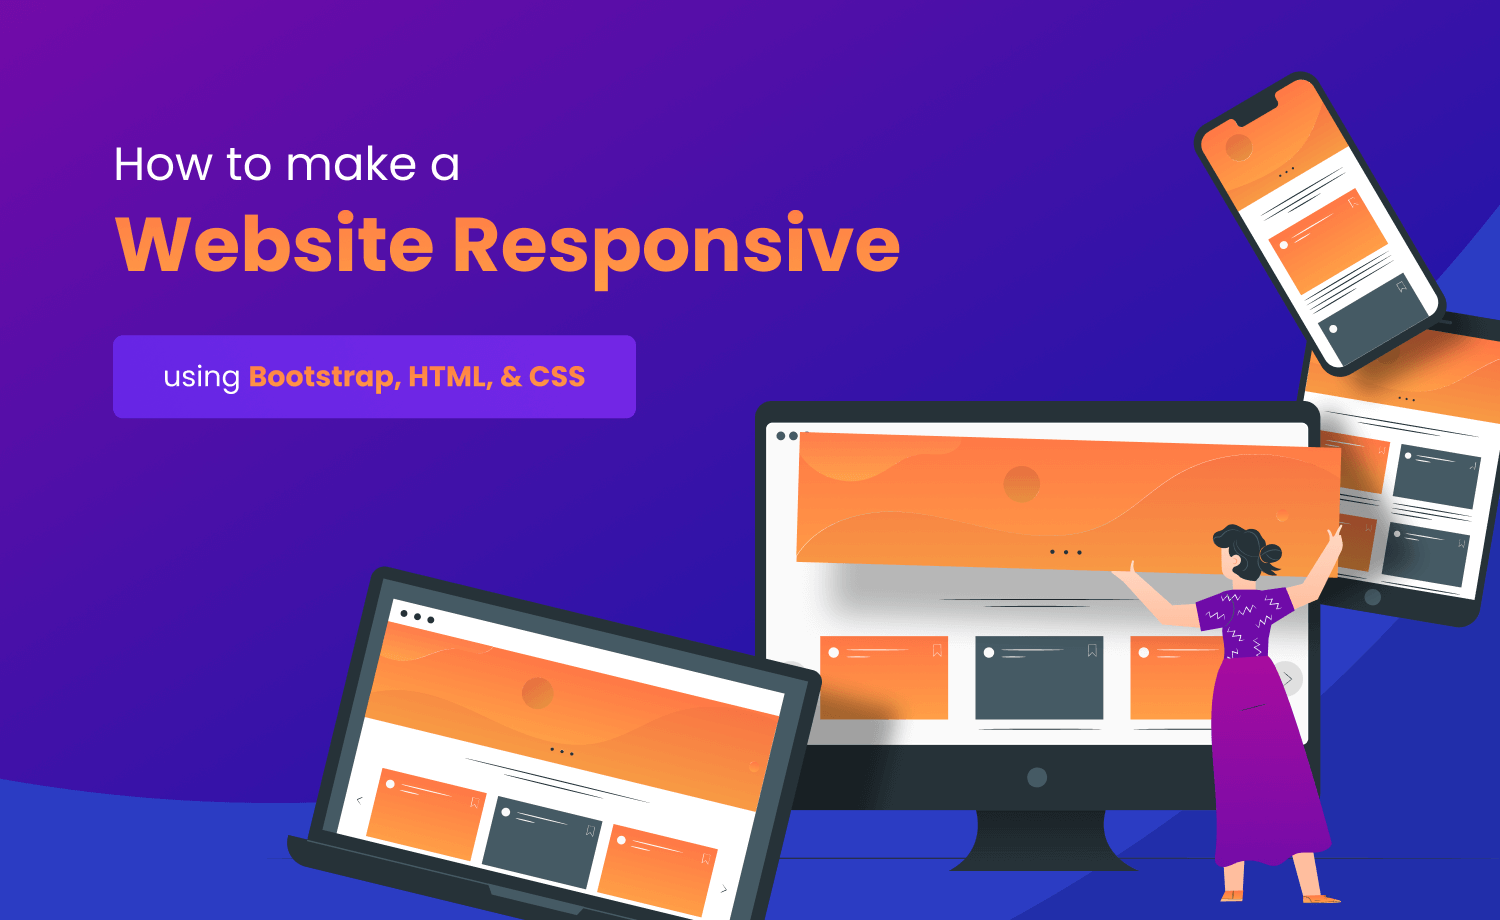 How to make a website responsive using Bootstrap, HTML, & CSS